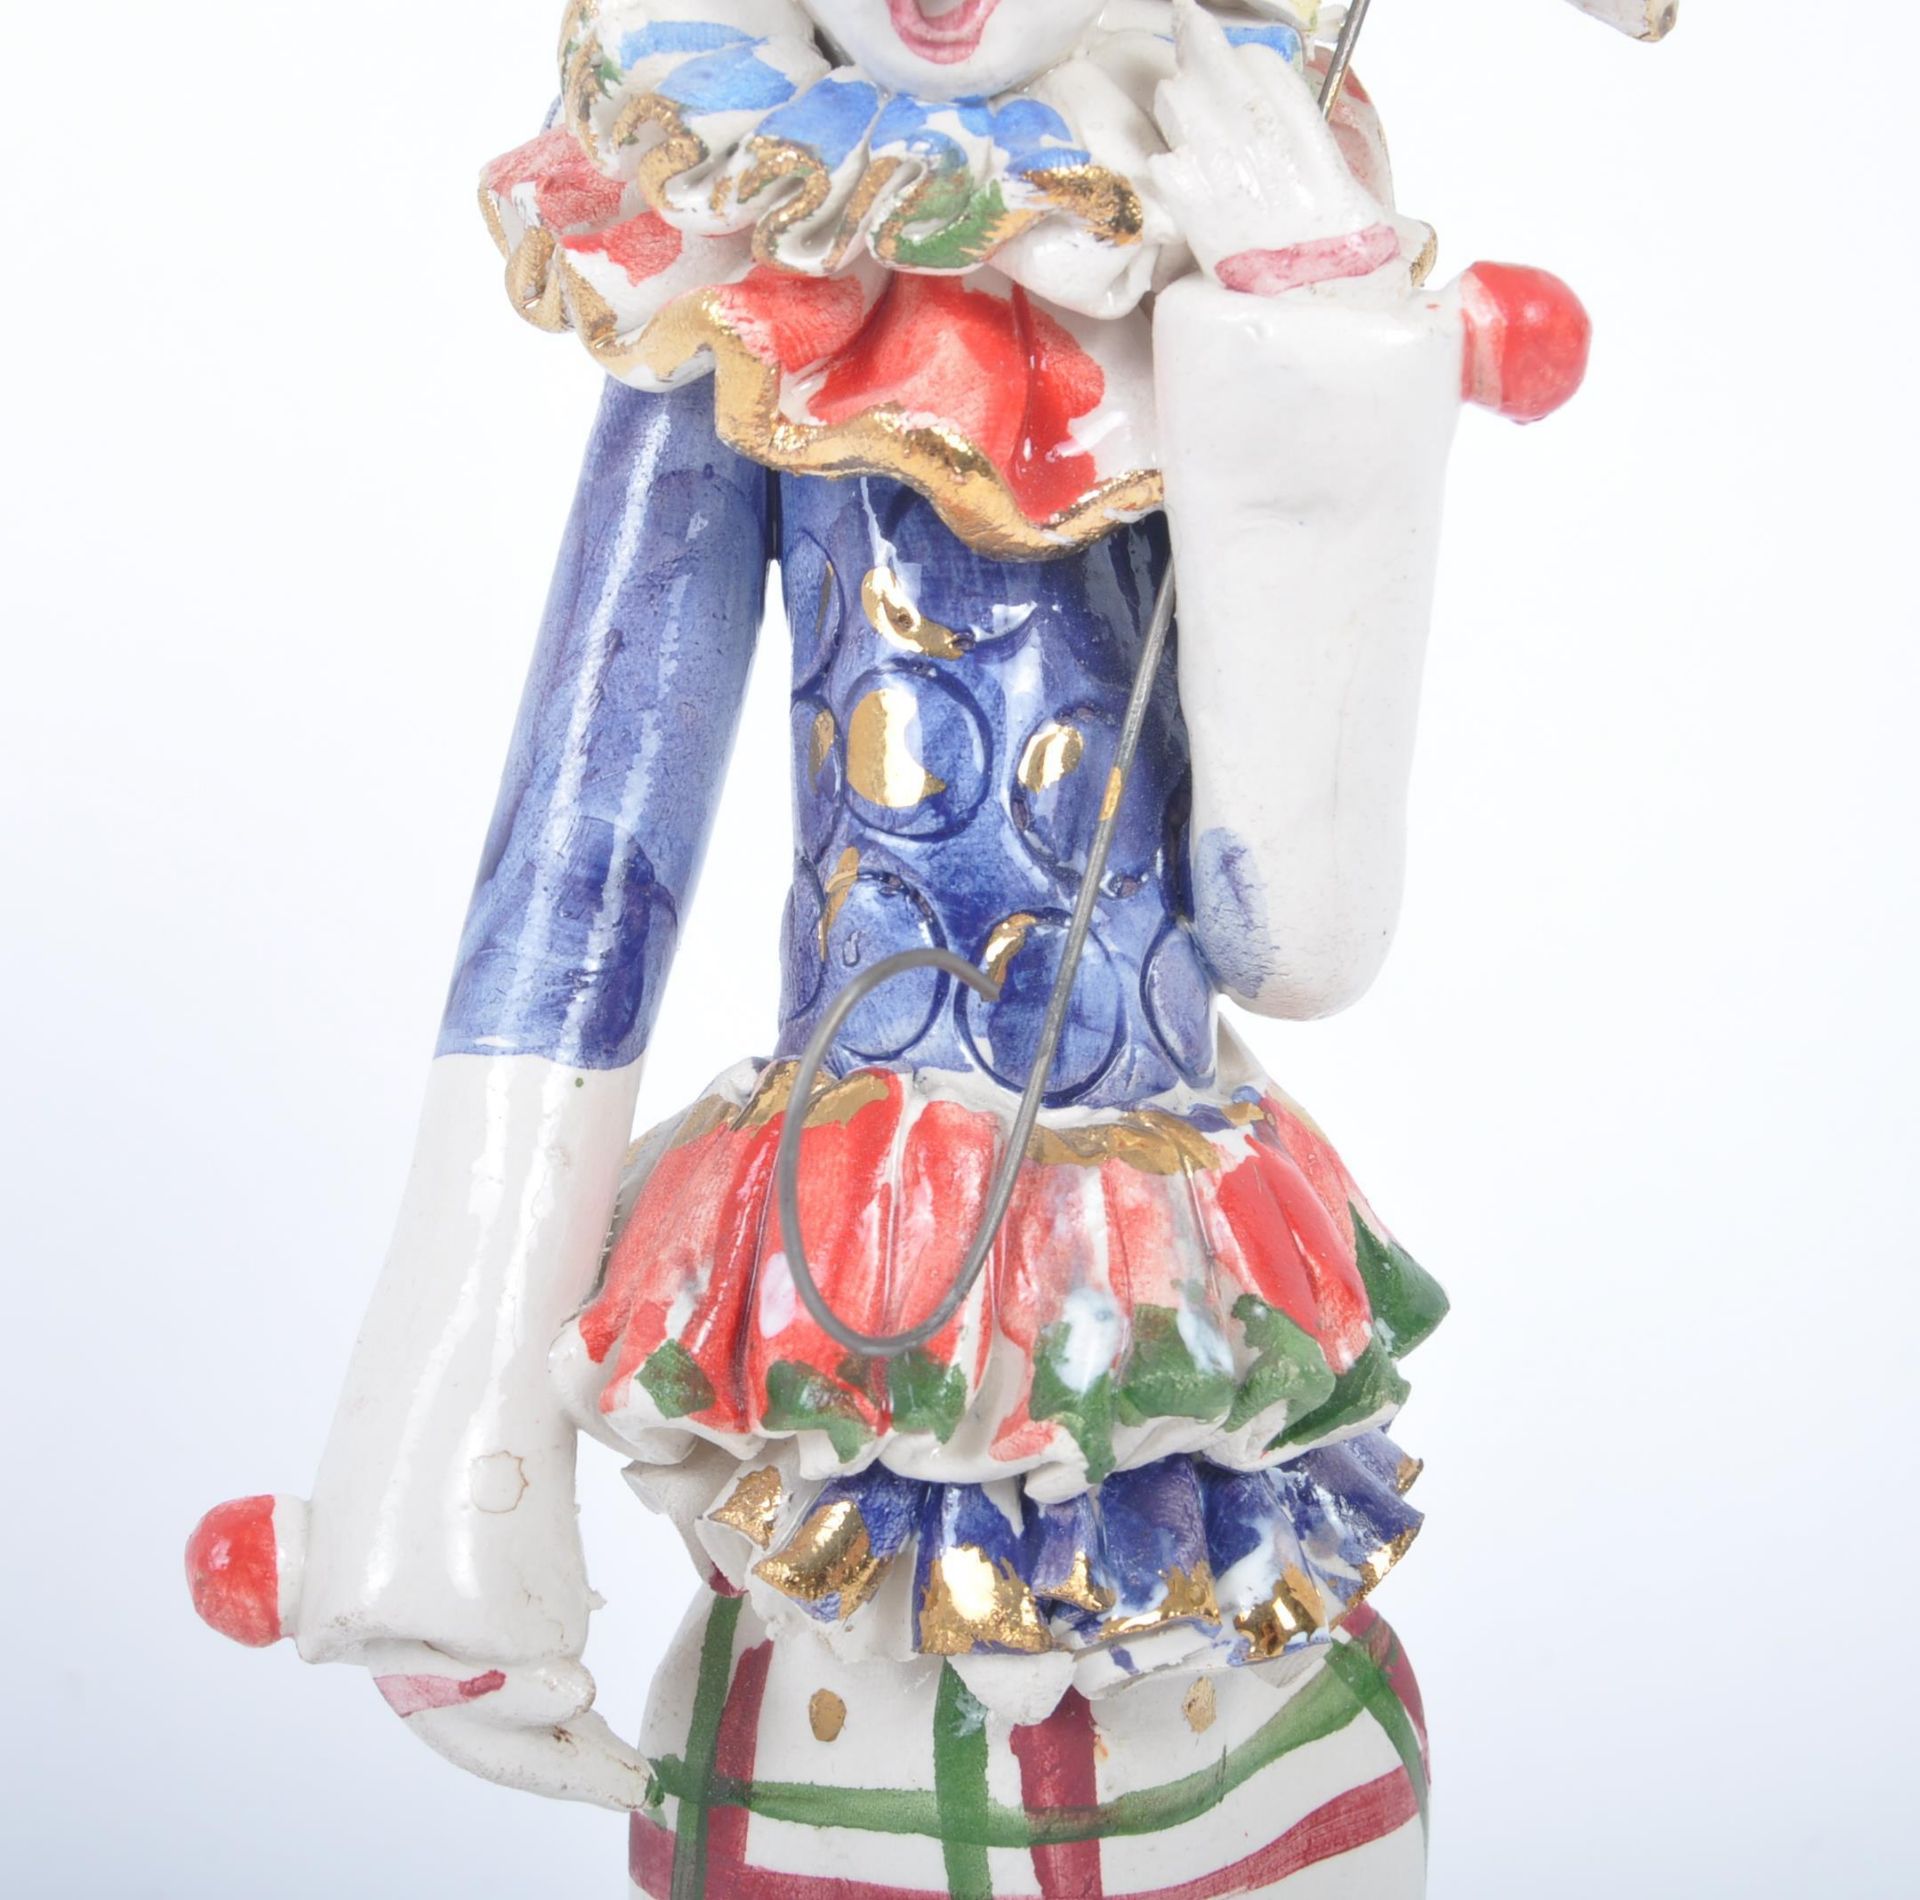 BELIEVED BASSANO ITALY VINTAGE PORCELAIN HAND PAINTED CLOWN - Image 3 of 6